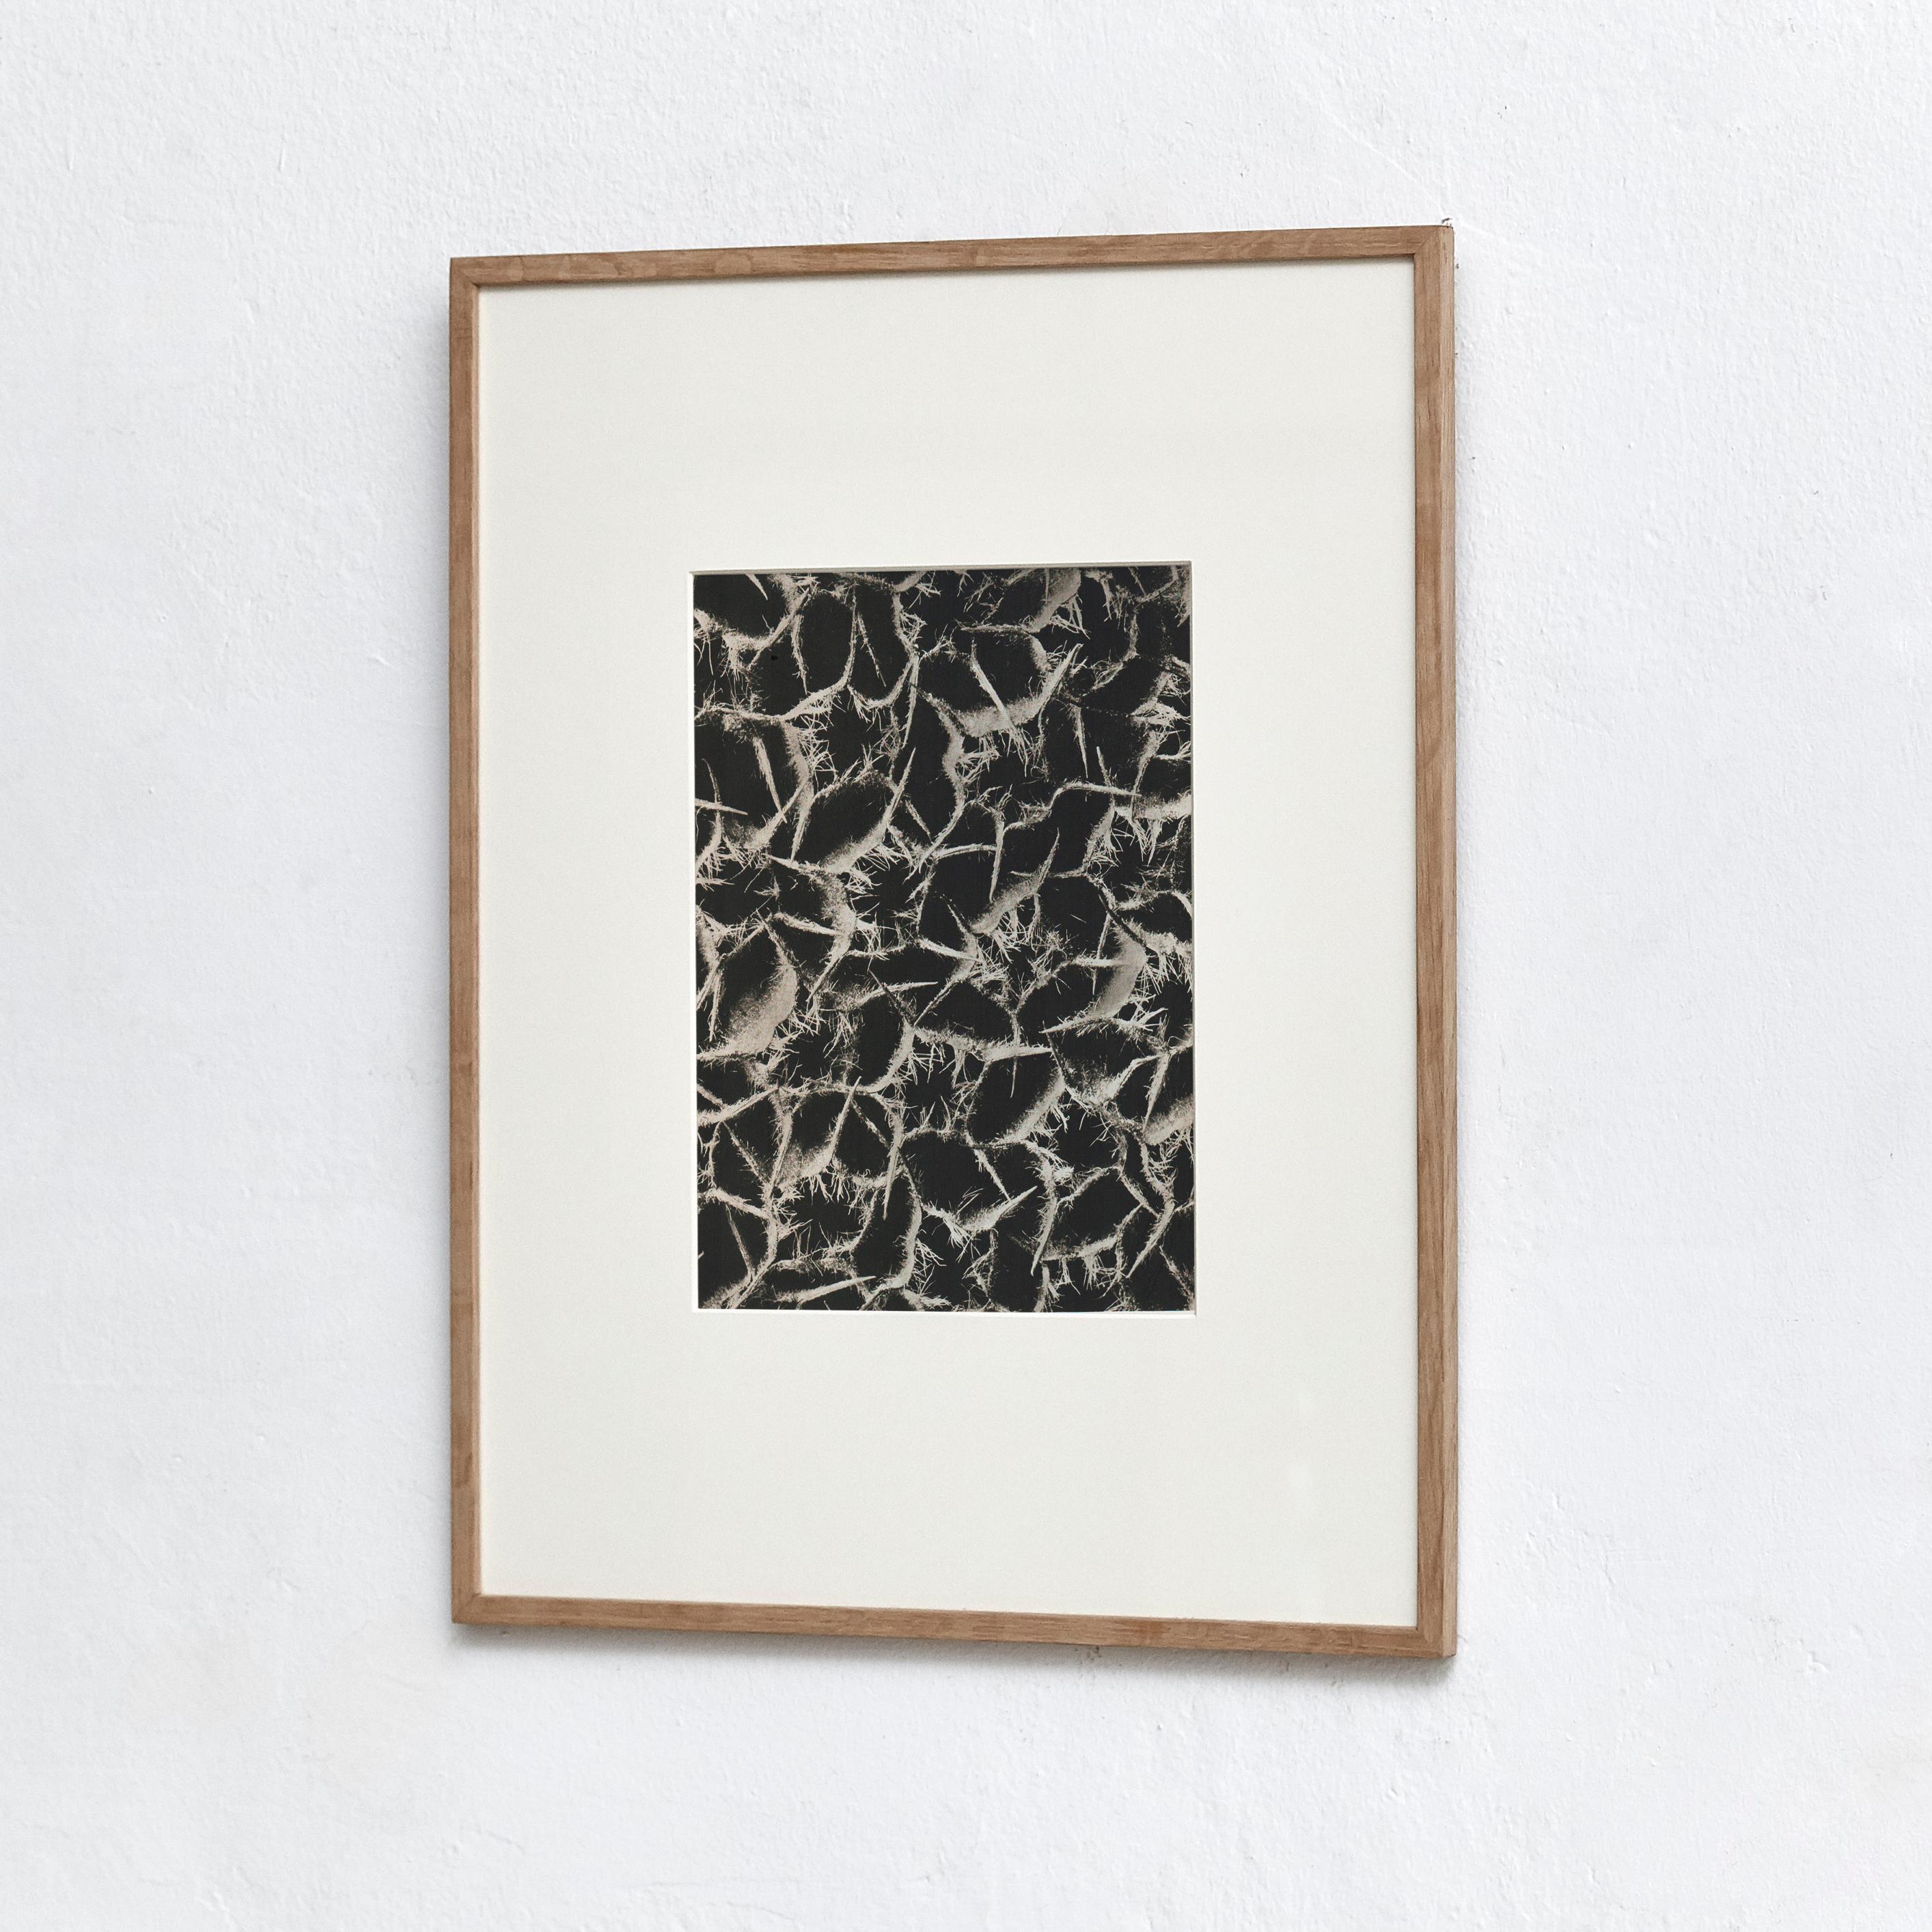 Karl Blossfeldt photogravure from the edition of the book 'Wunder in der Natur' in 1942.

Photography number 34 Ballota acuta. Gottverge. Sonnenkrone in 20 8 facher Vergrößerung.

In original condition, with minor wear consistent with age and